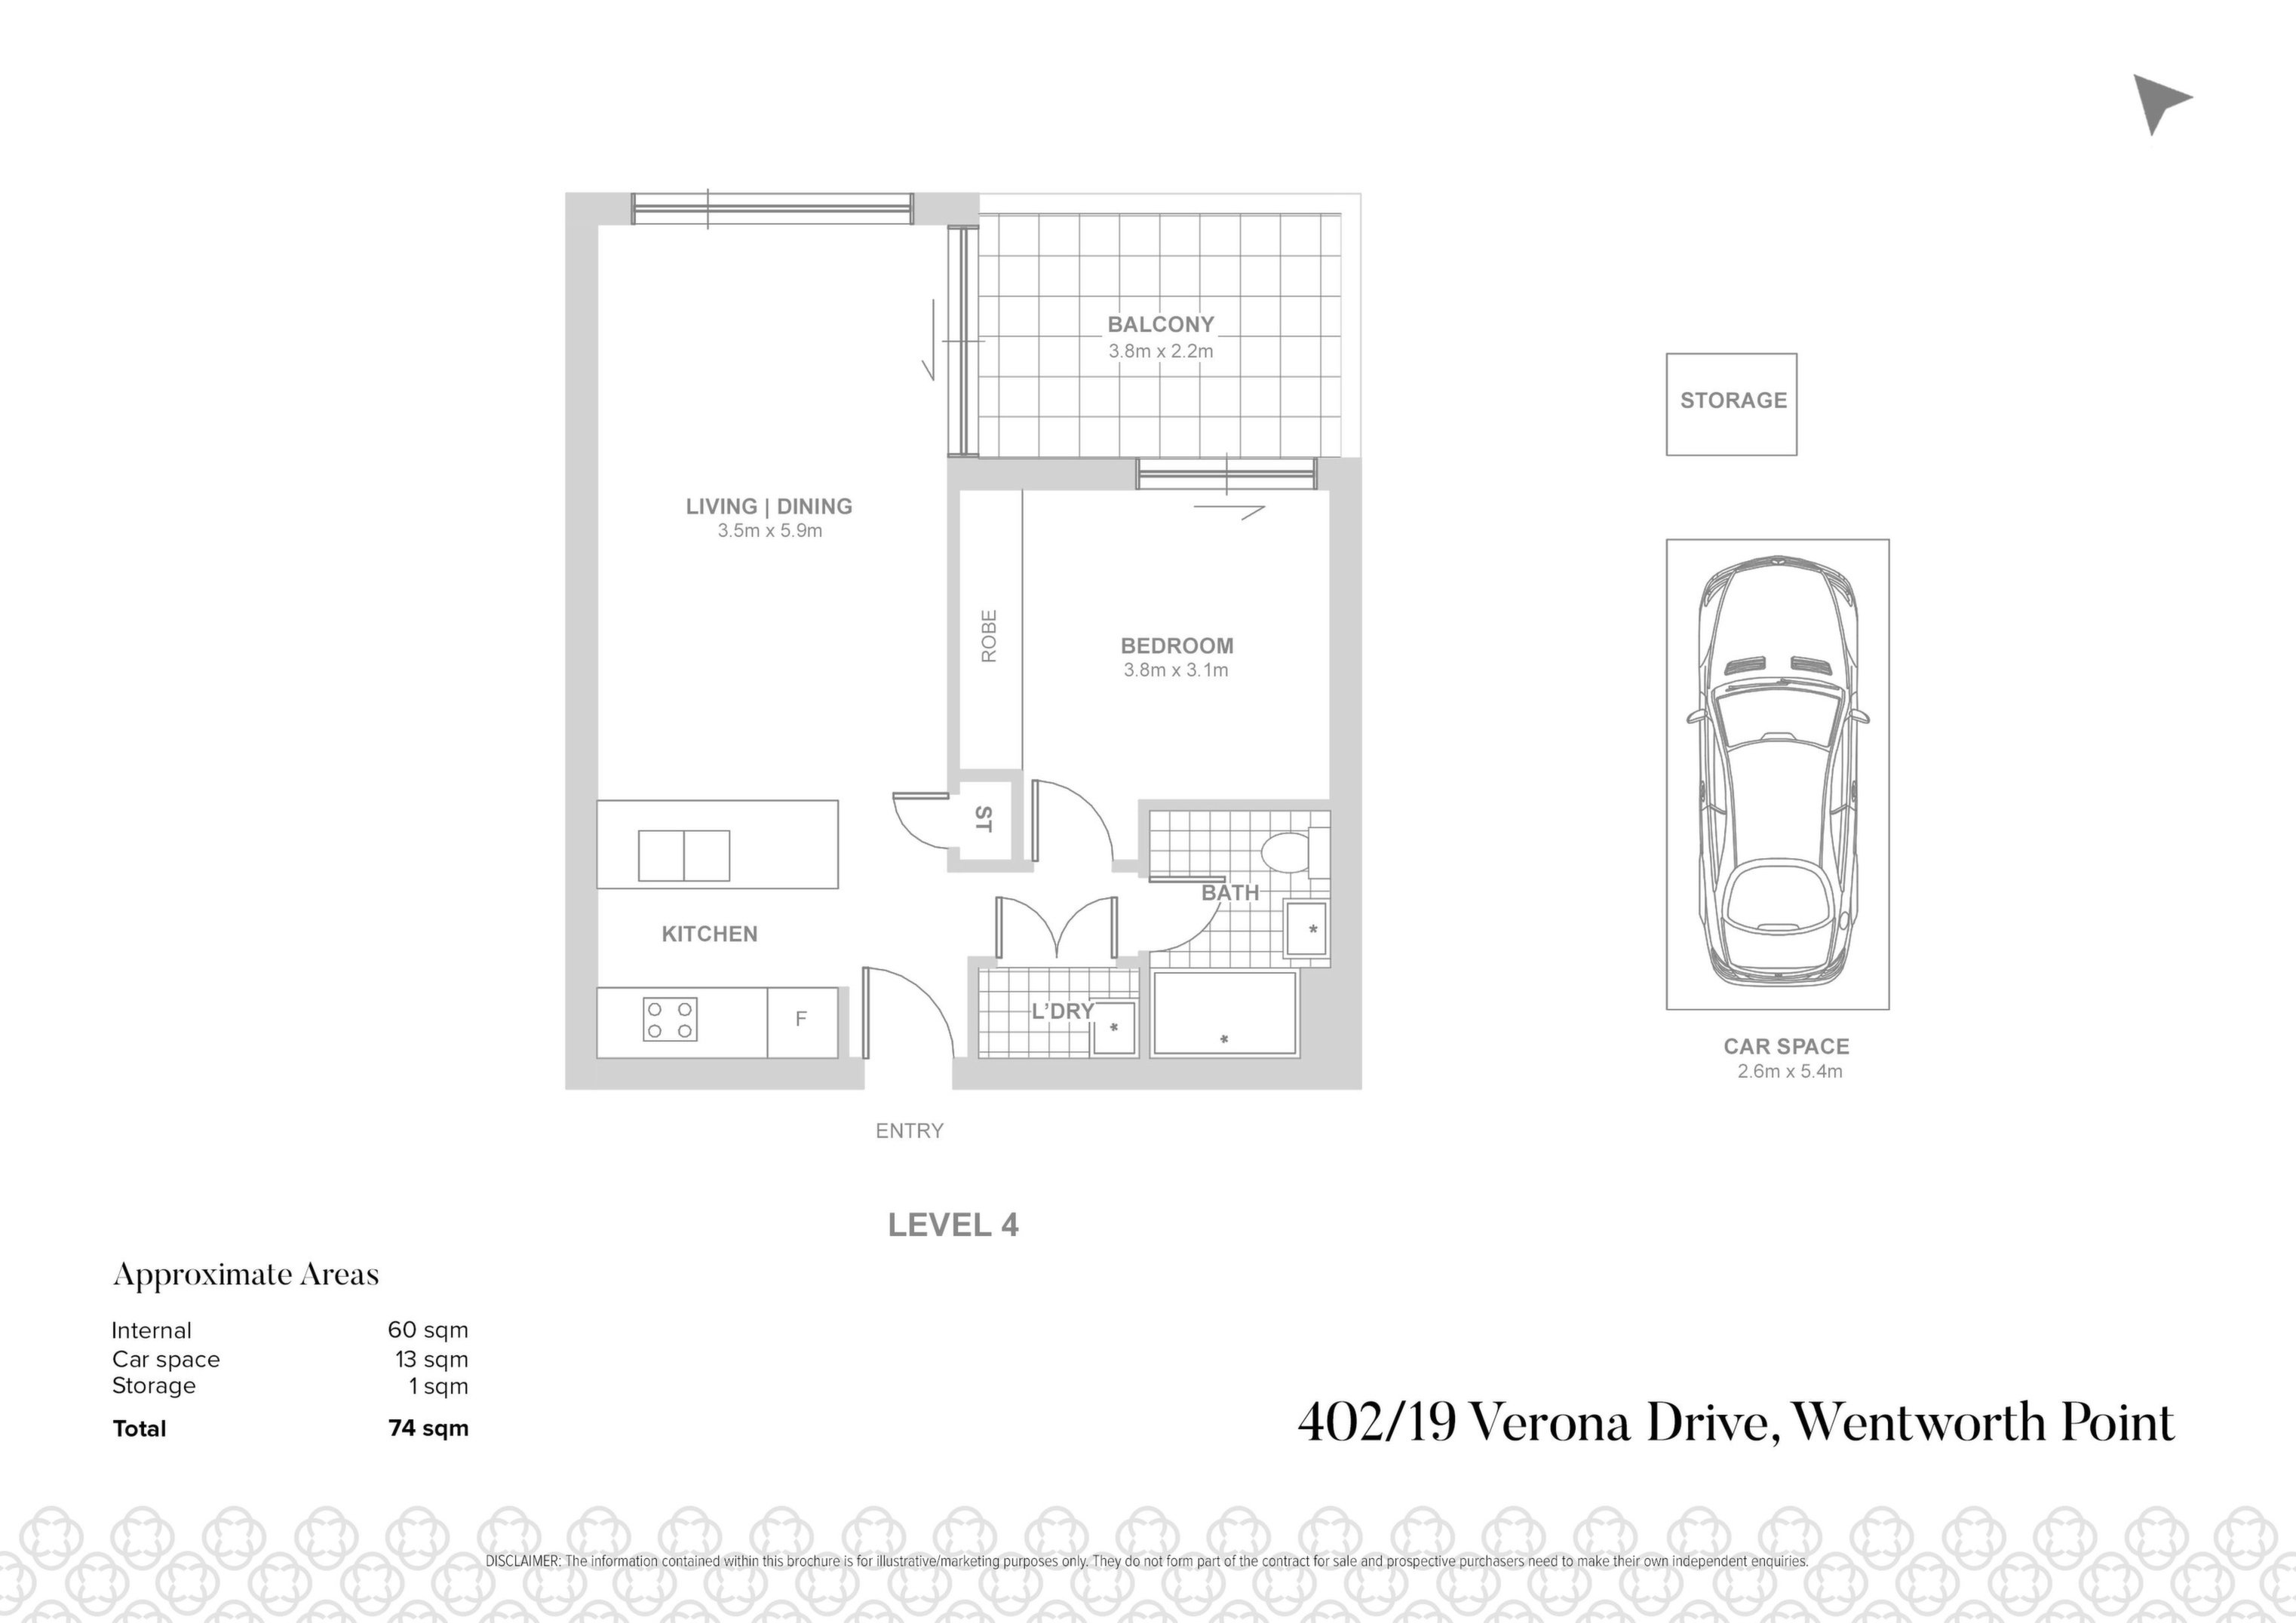 402/19 Verona Drive, Wentworth Point Sold by Chidiac Realty - floorplan